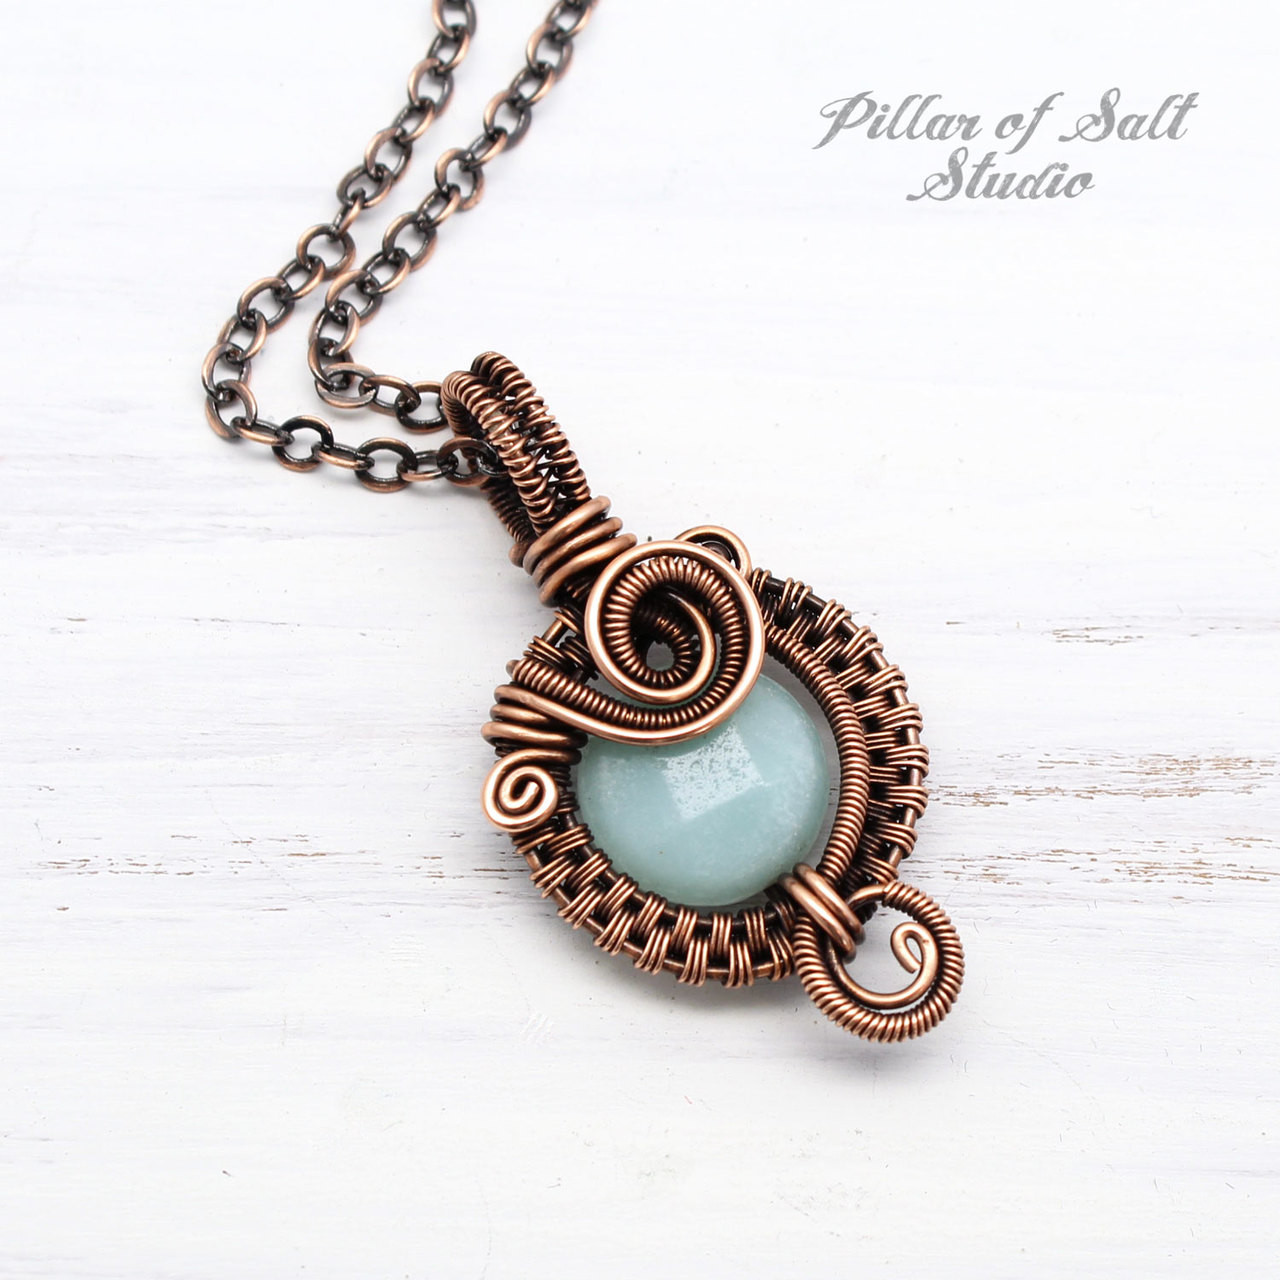 Solid Copper Chain necklace - Great option for Pendants - Pillar